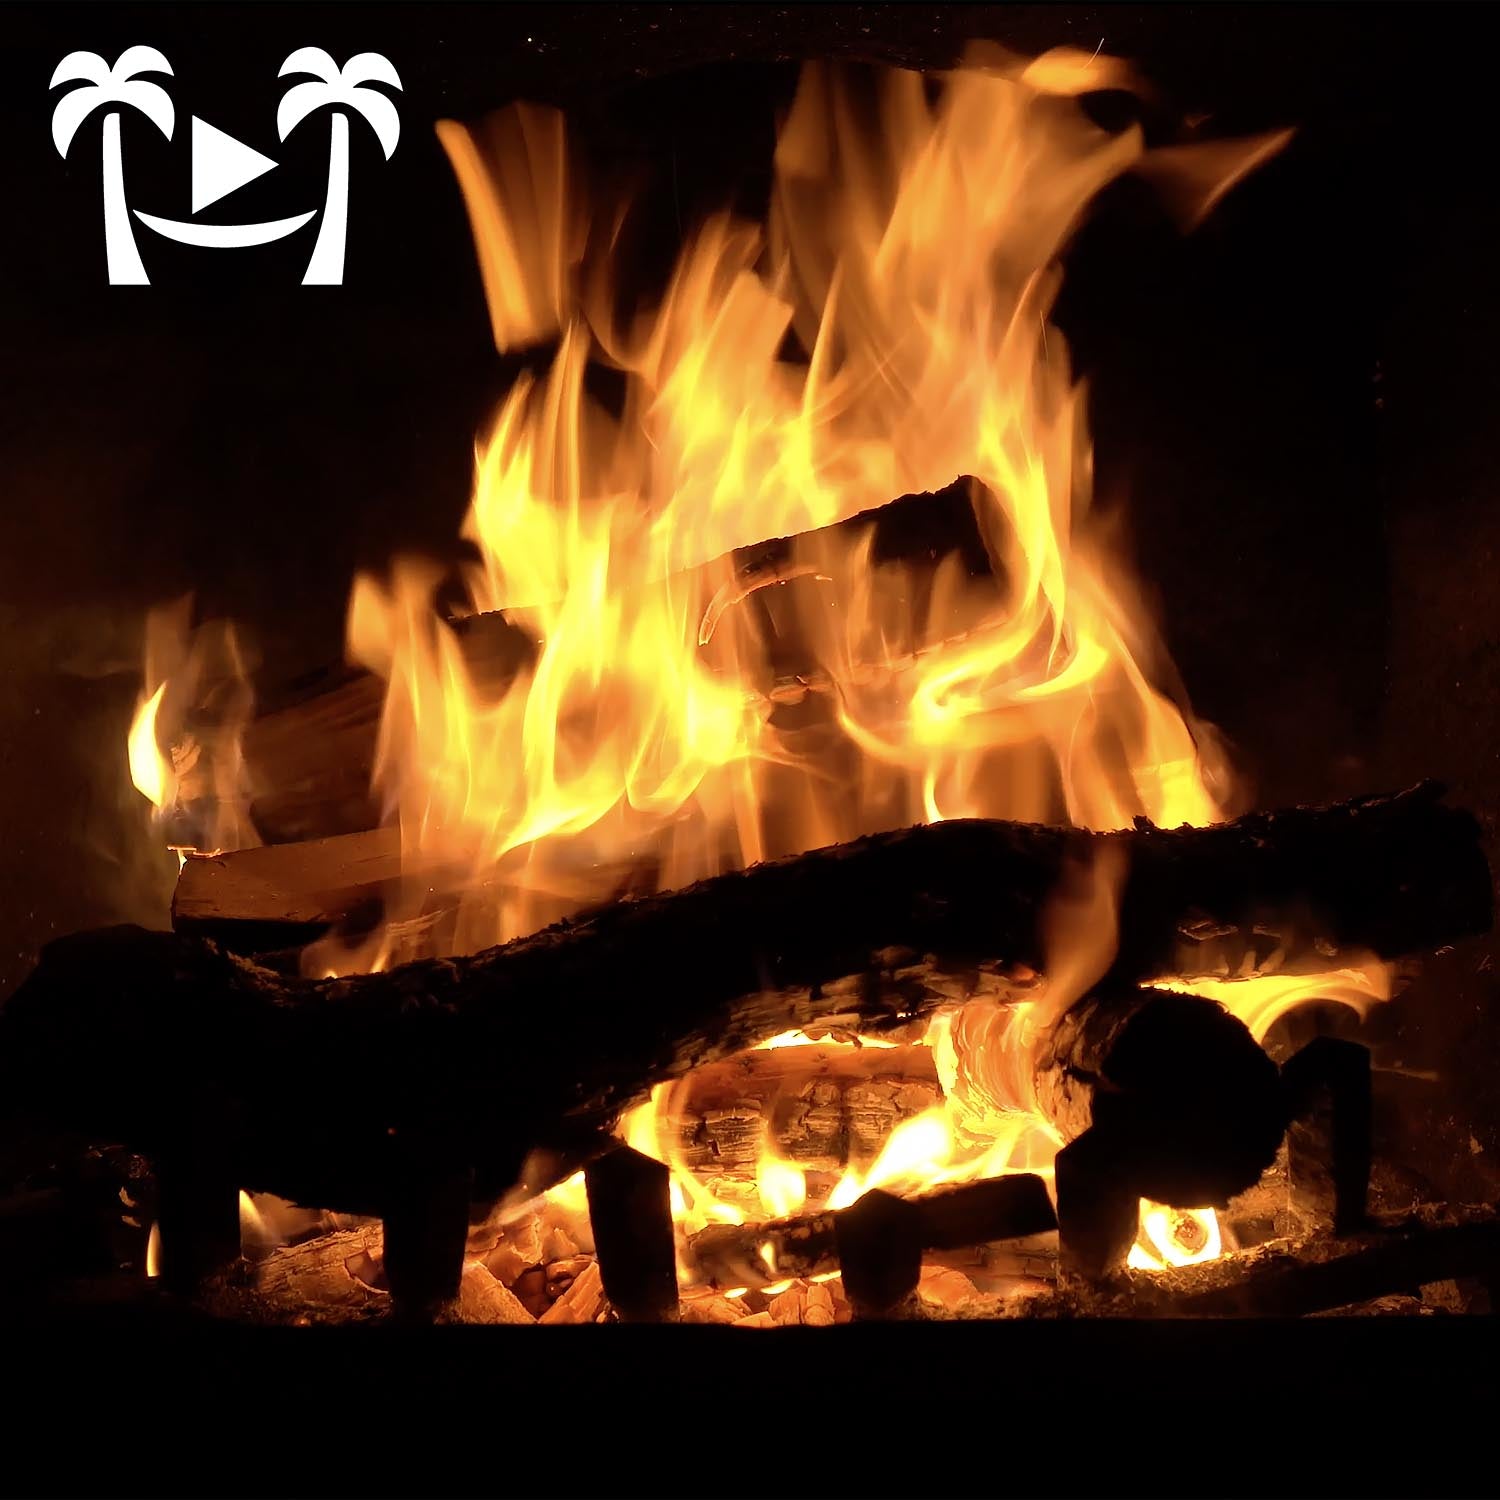 video crackling fireplace